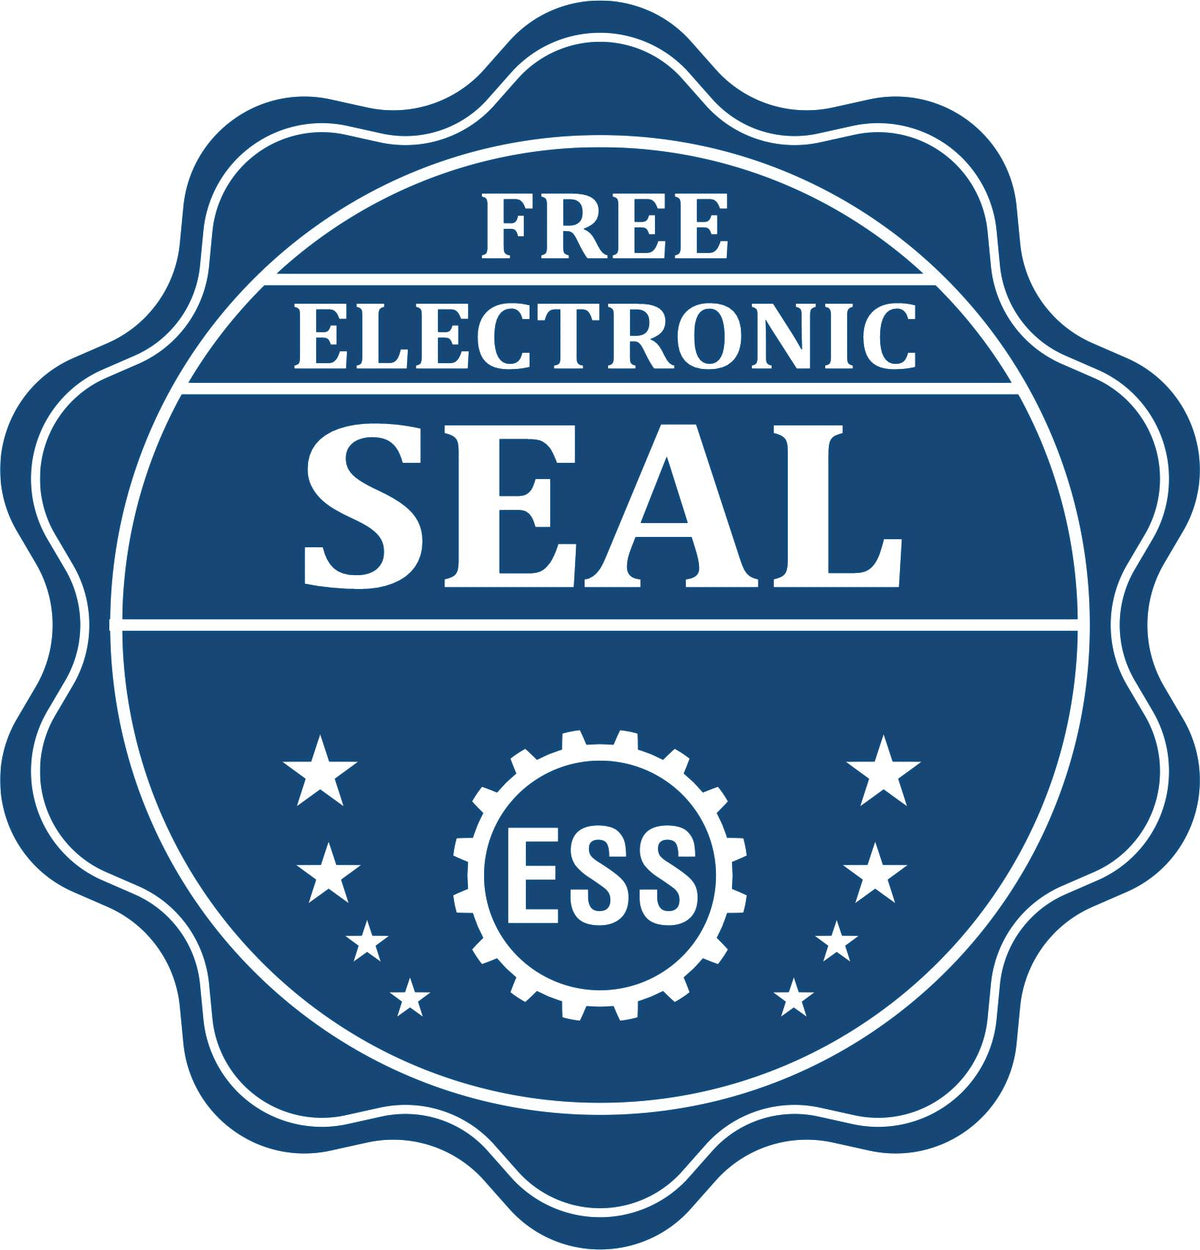 A badge showing a free electronic seal for the Long Reach Maryland Geology Seal with stars and the ESS gear on the emblem.